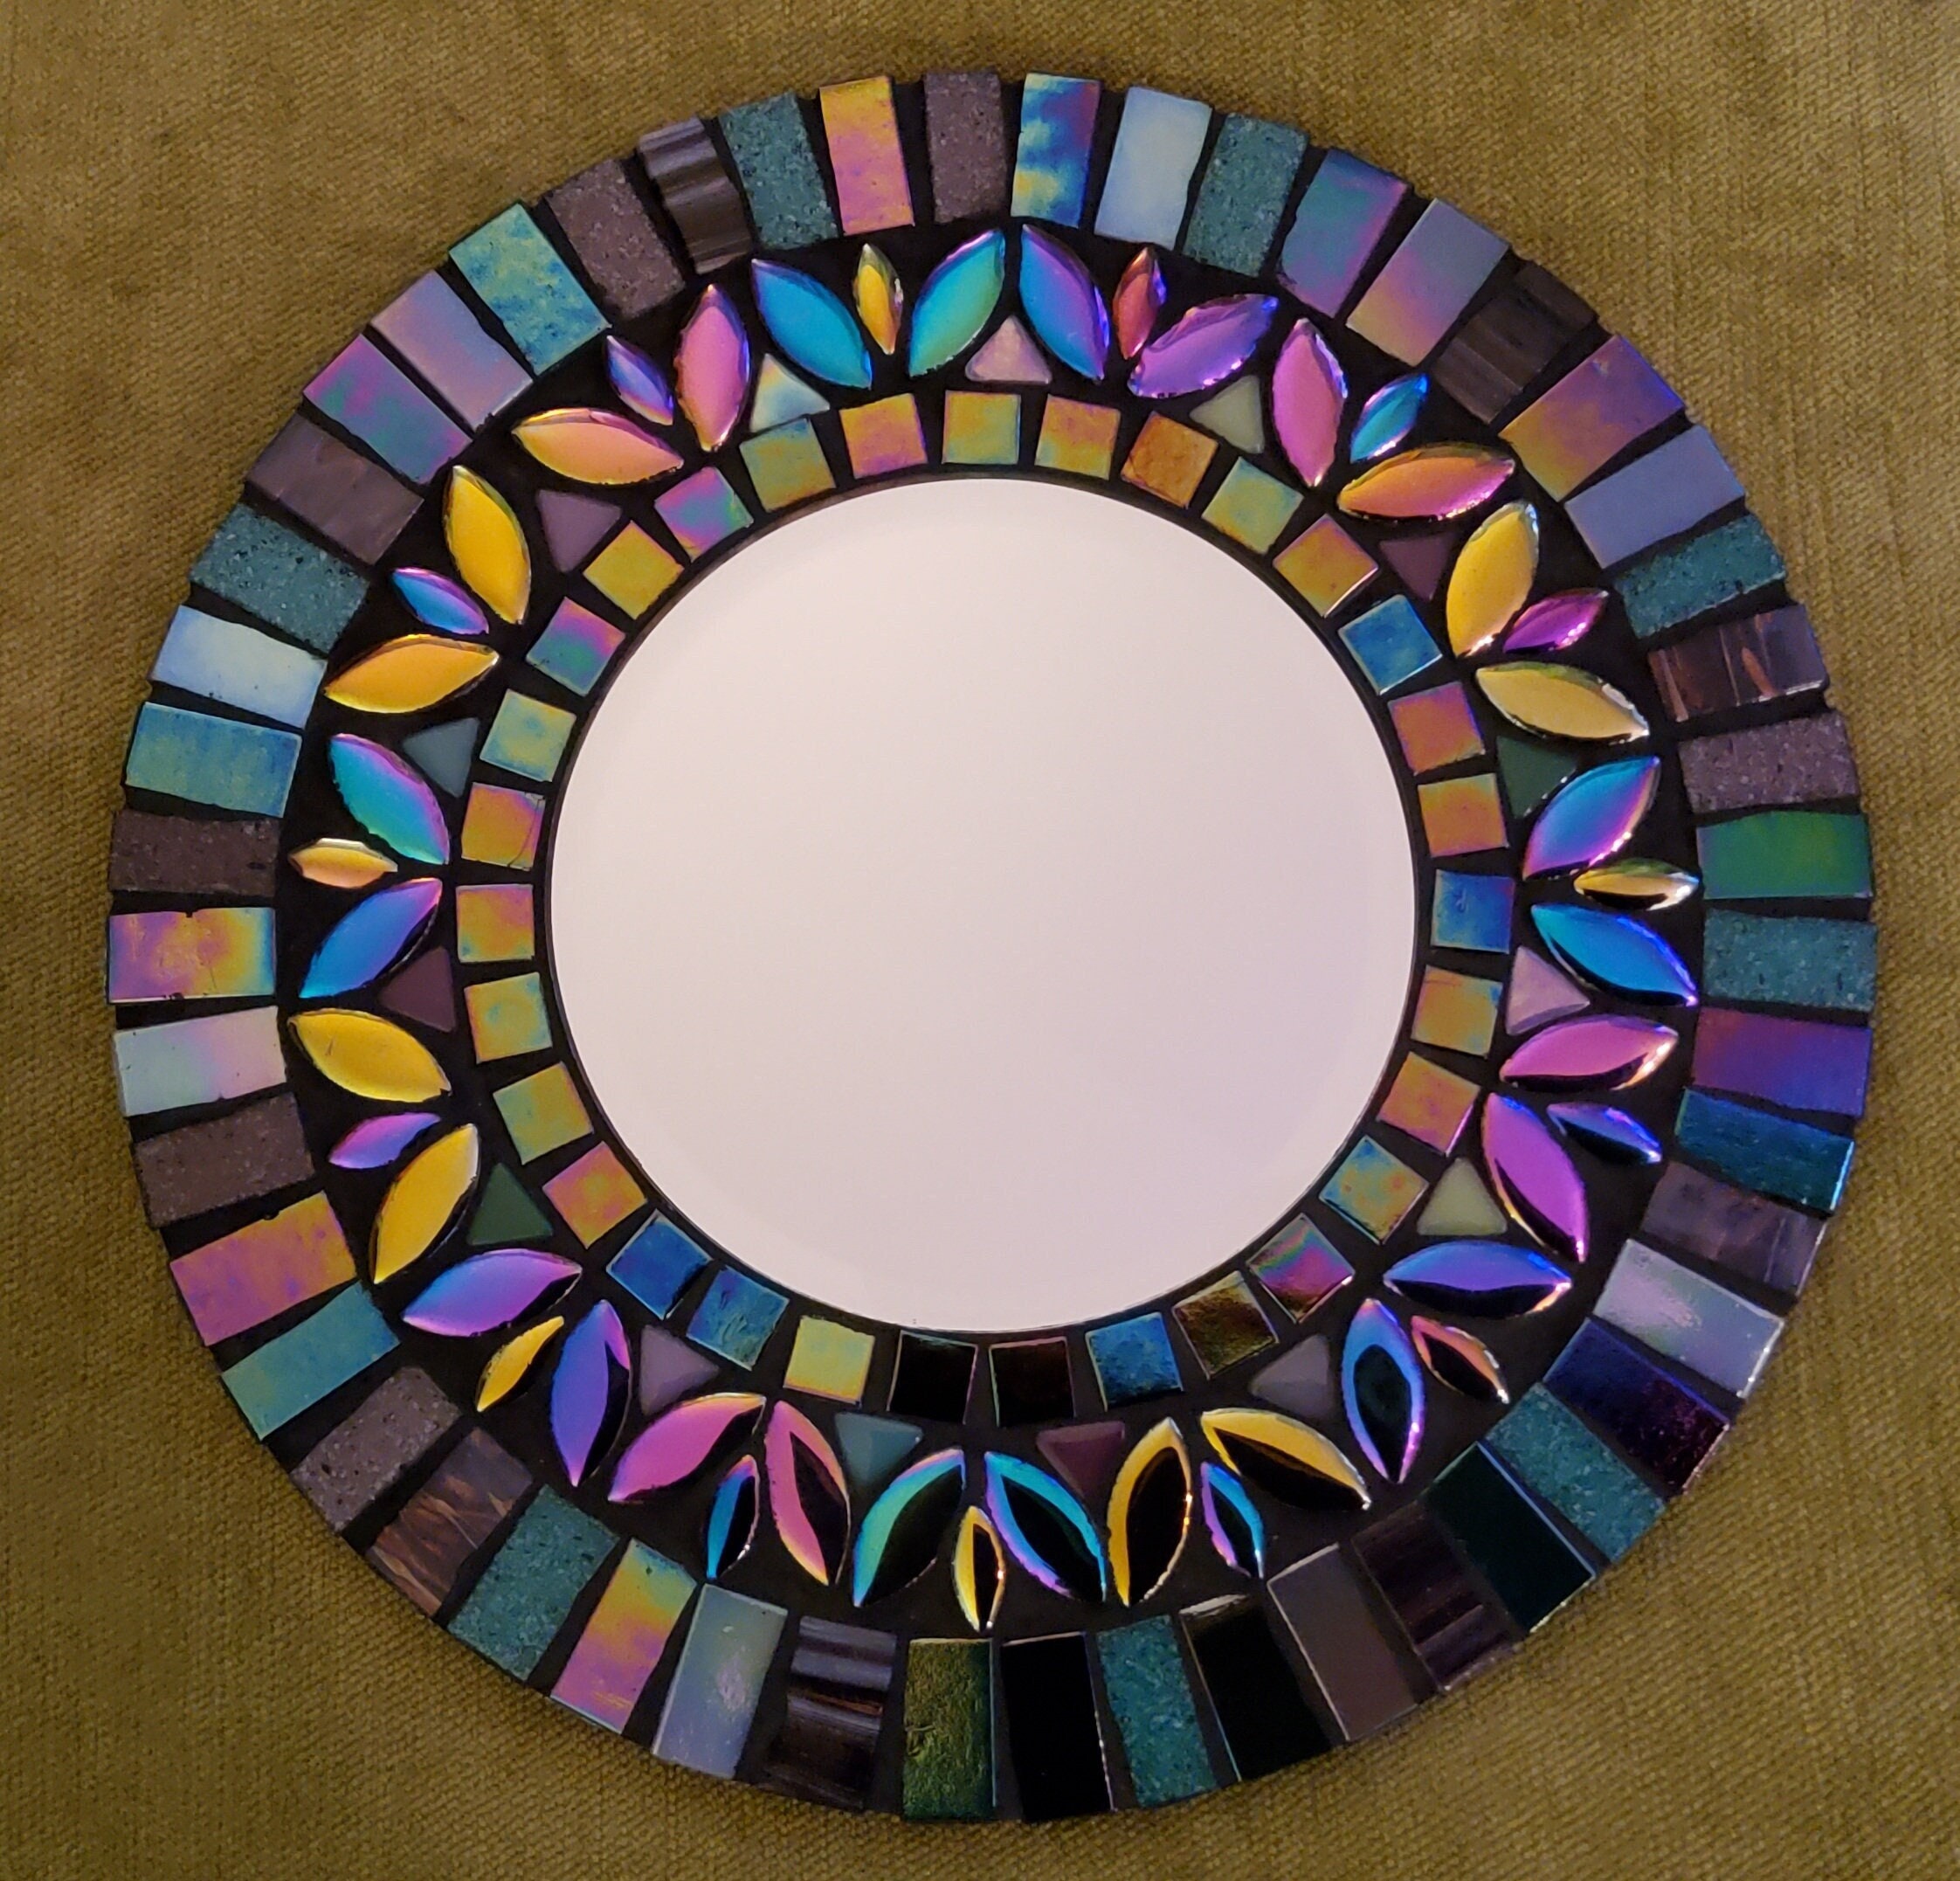 Crafter's Cut™ Assorted Mirror Mosaic Tiles